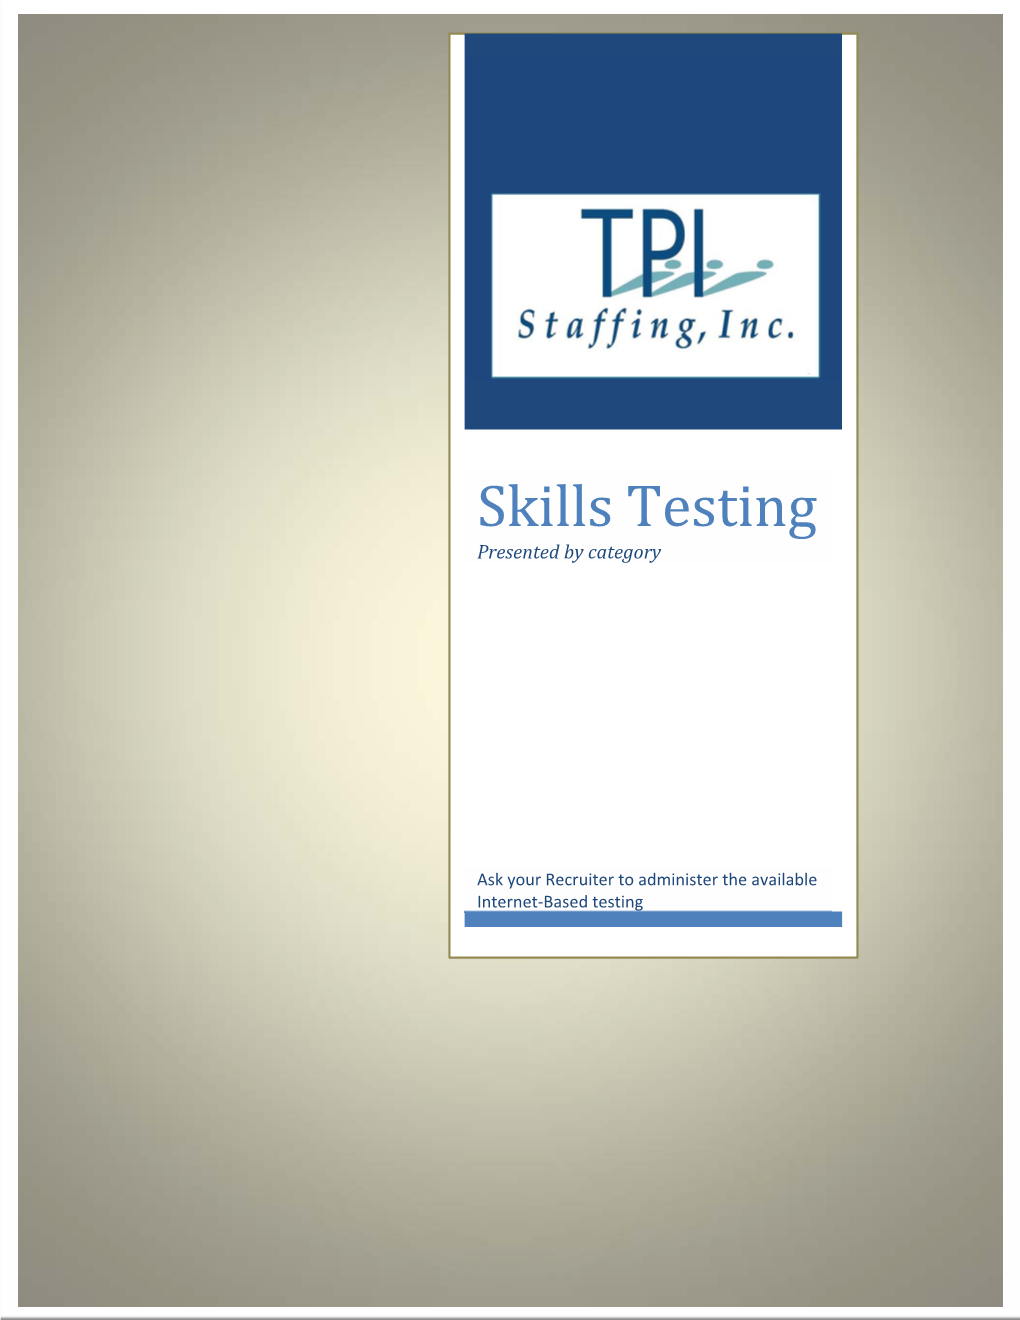 Skills Testing Presented by Category